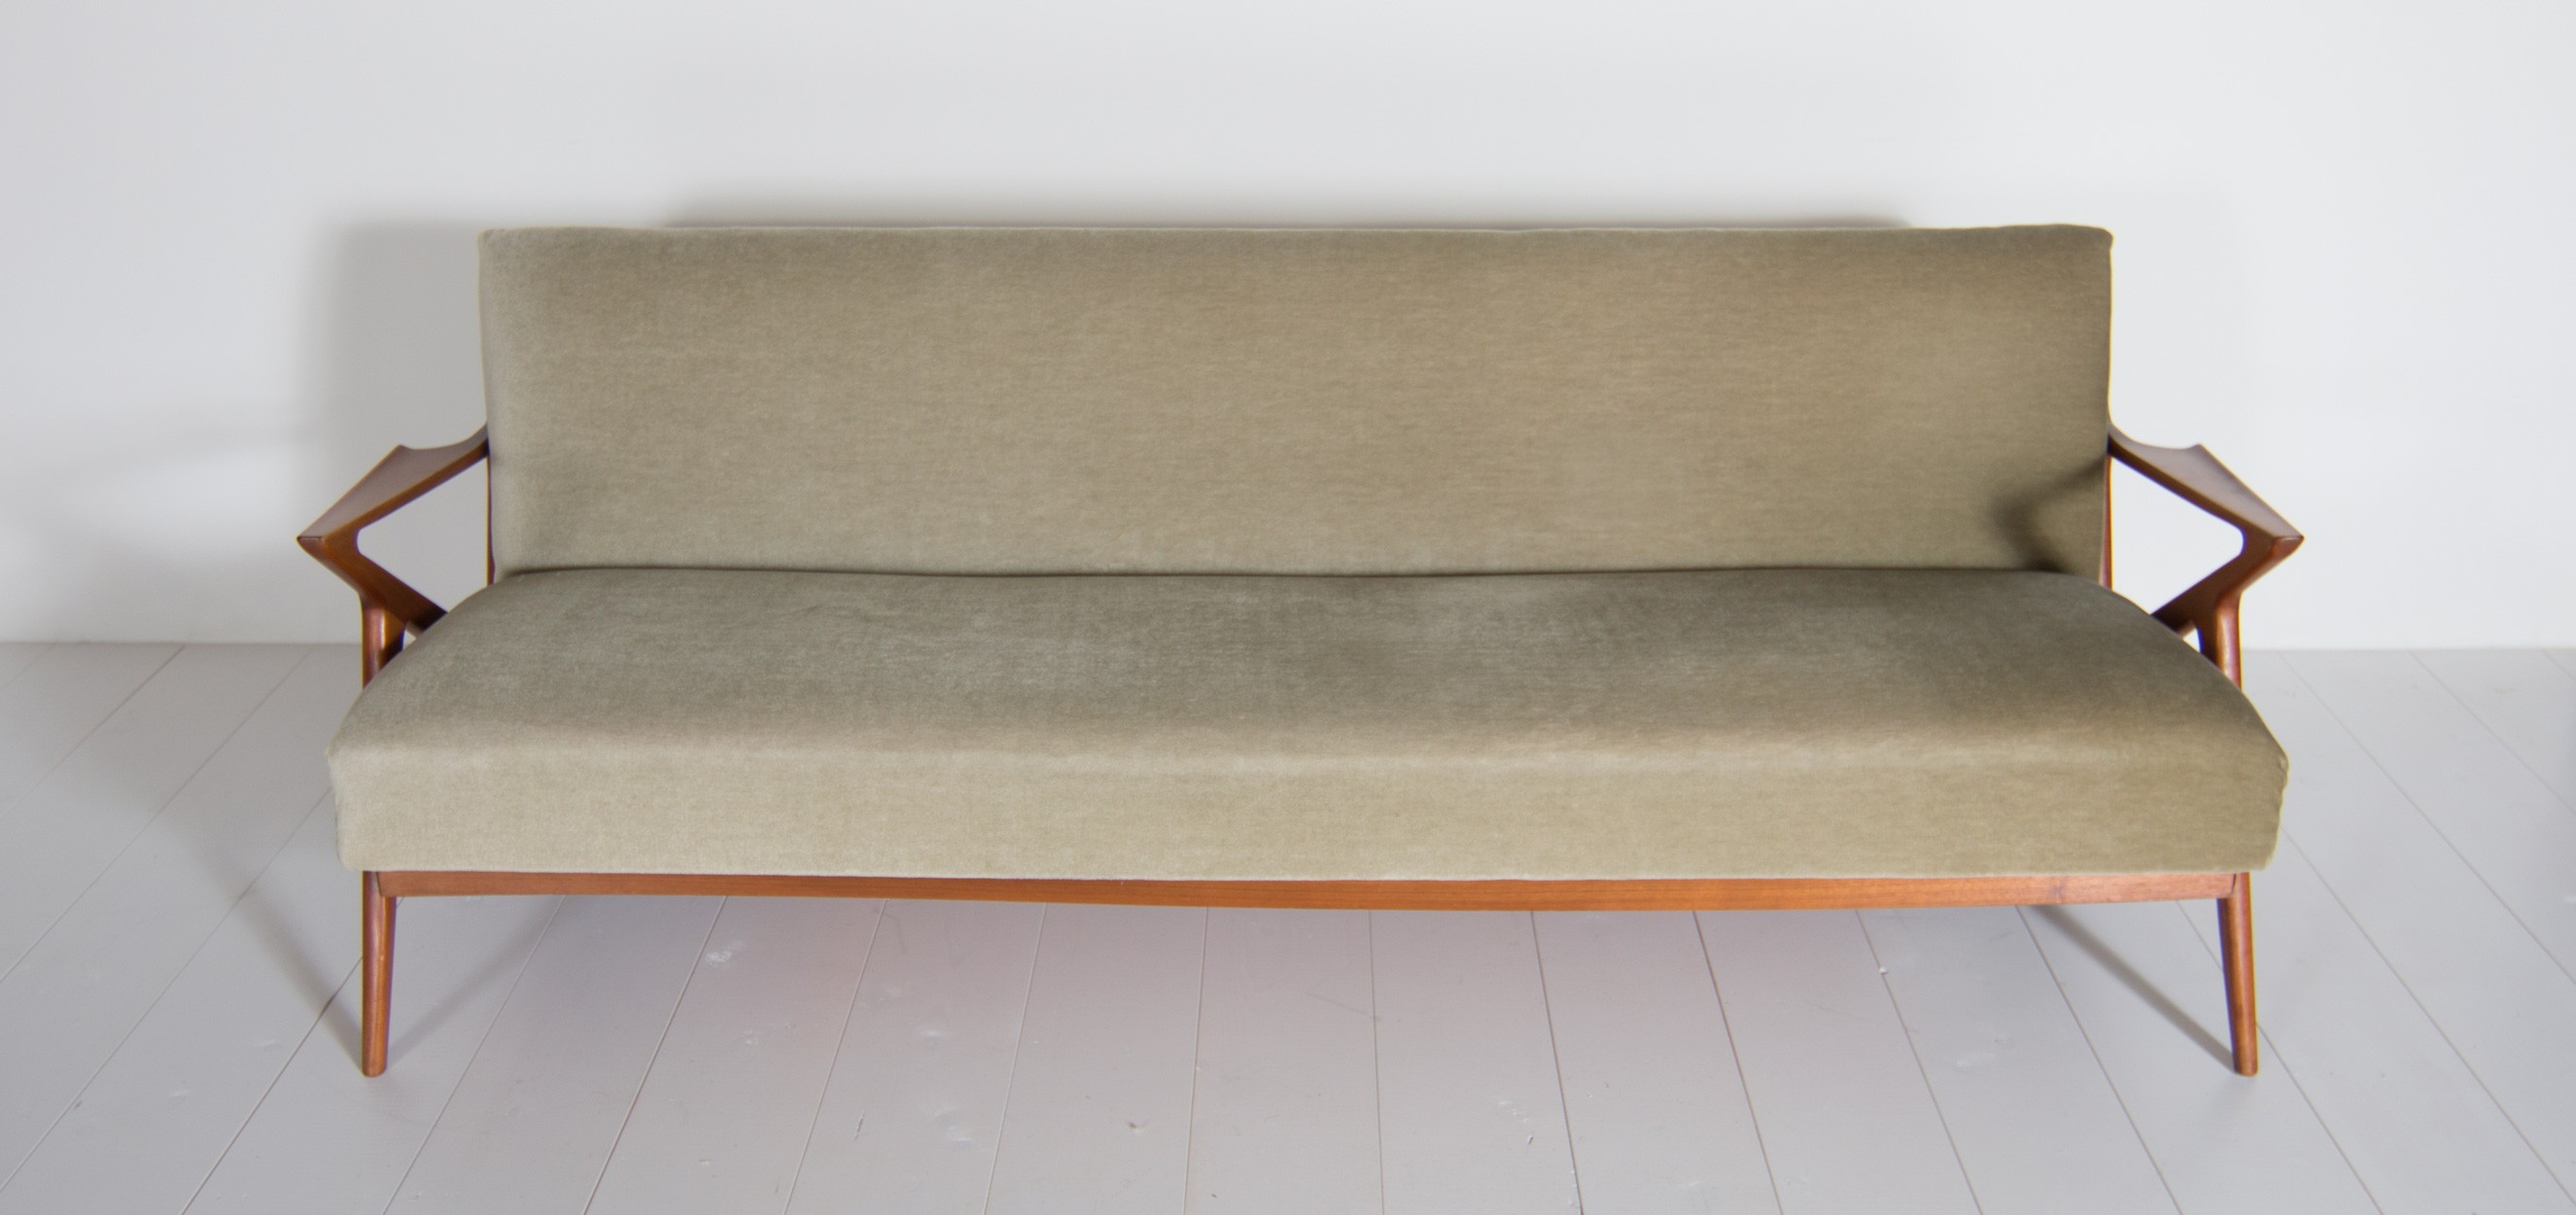 Canap Z Daybed By Poul Jensen For Selig OPE 1950s Design Market